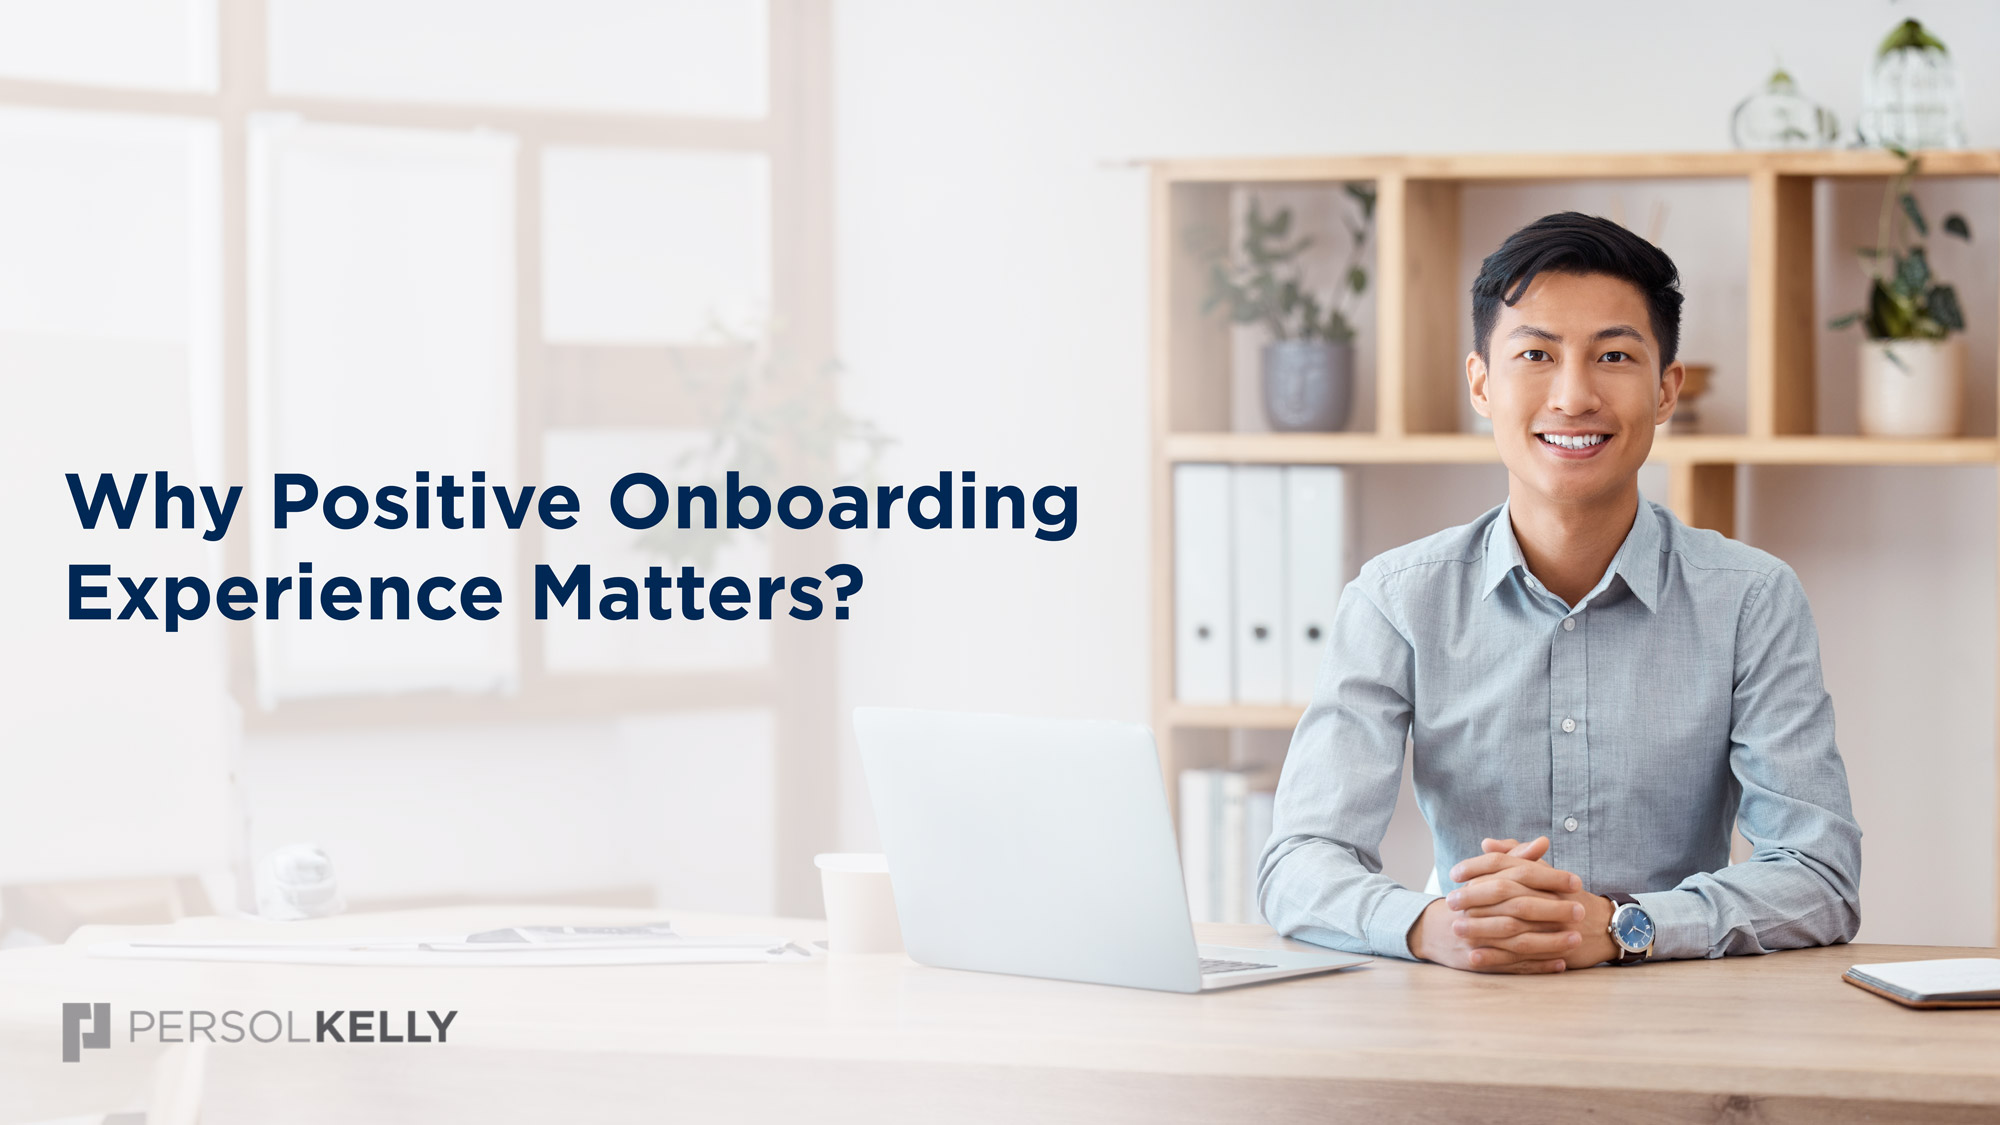 Why Positive Onboarding Experience Matters?